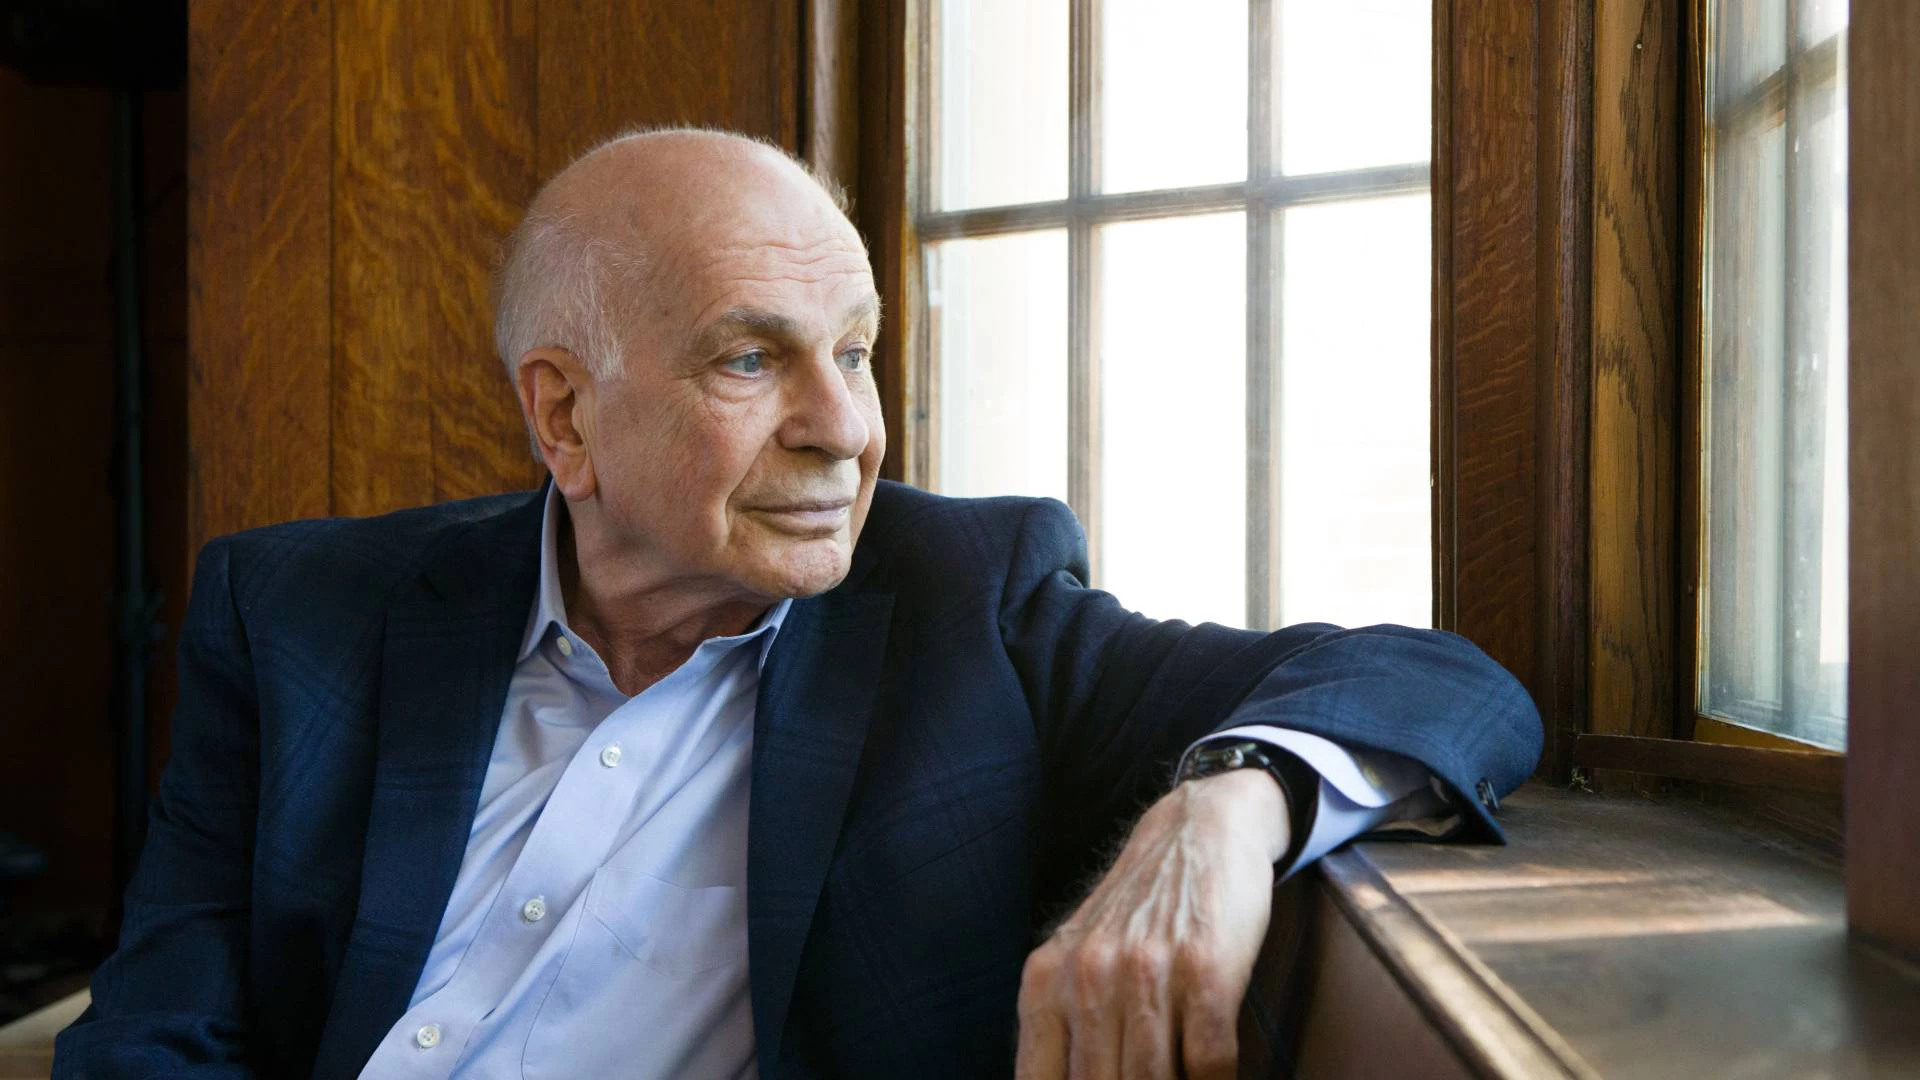 Remembering Daniel Kahneman: A Legacy of Insight and Humility